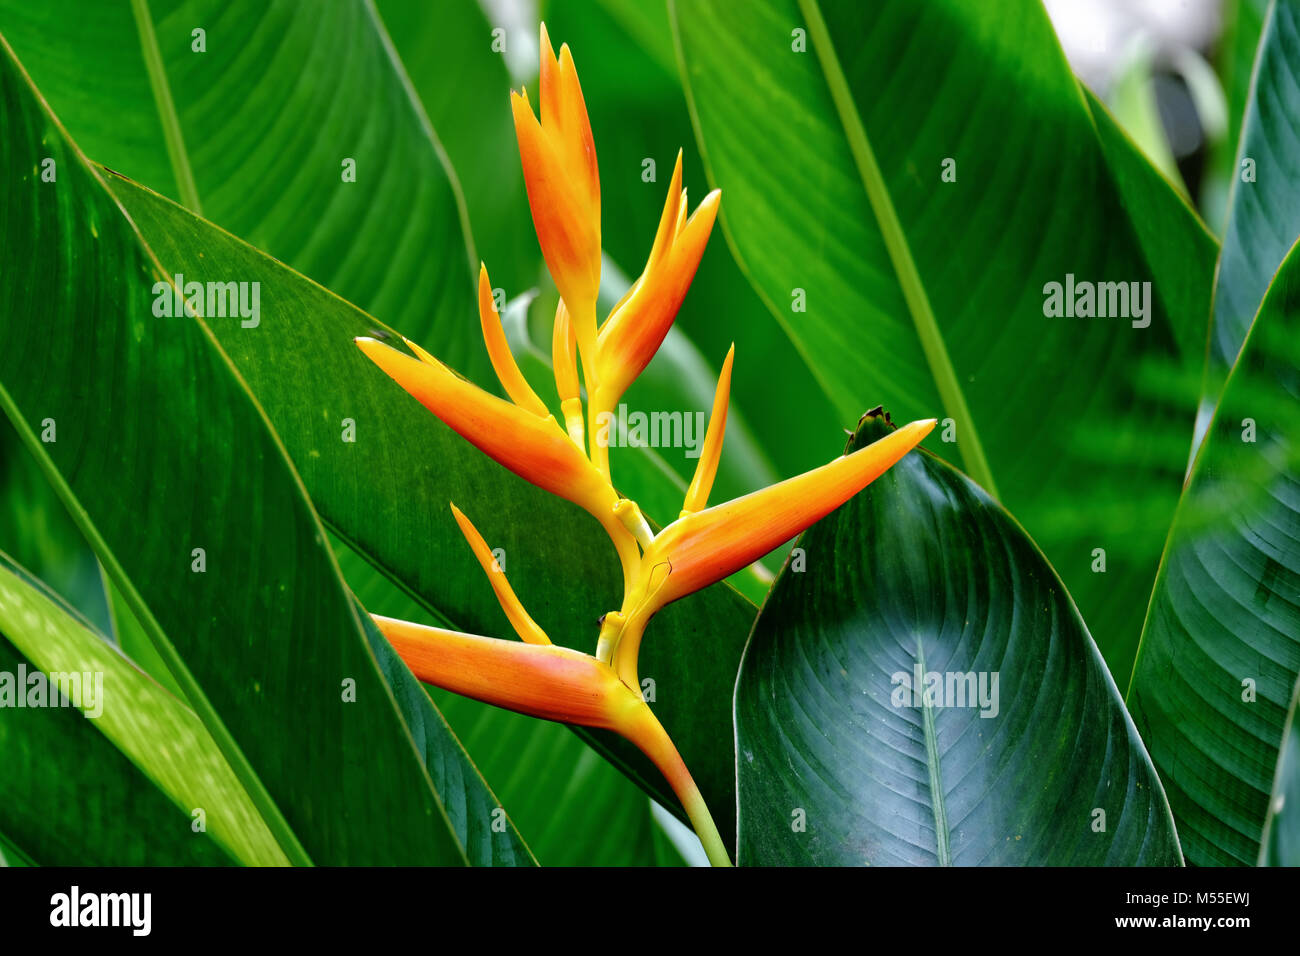 The Heliconia flower with leafs Stock Photo